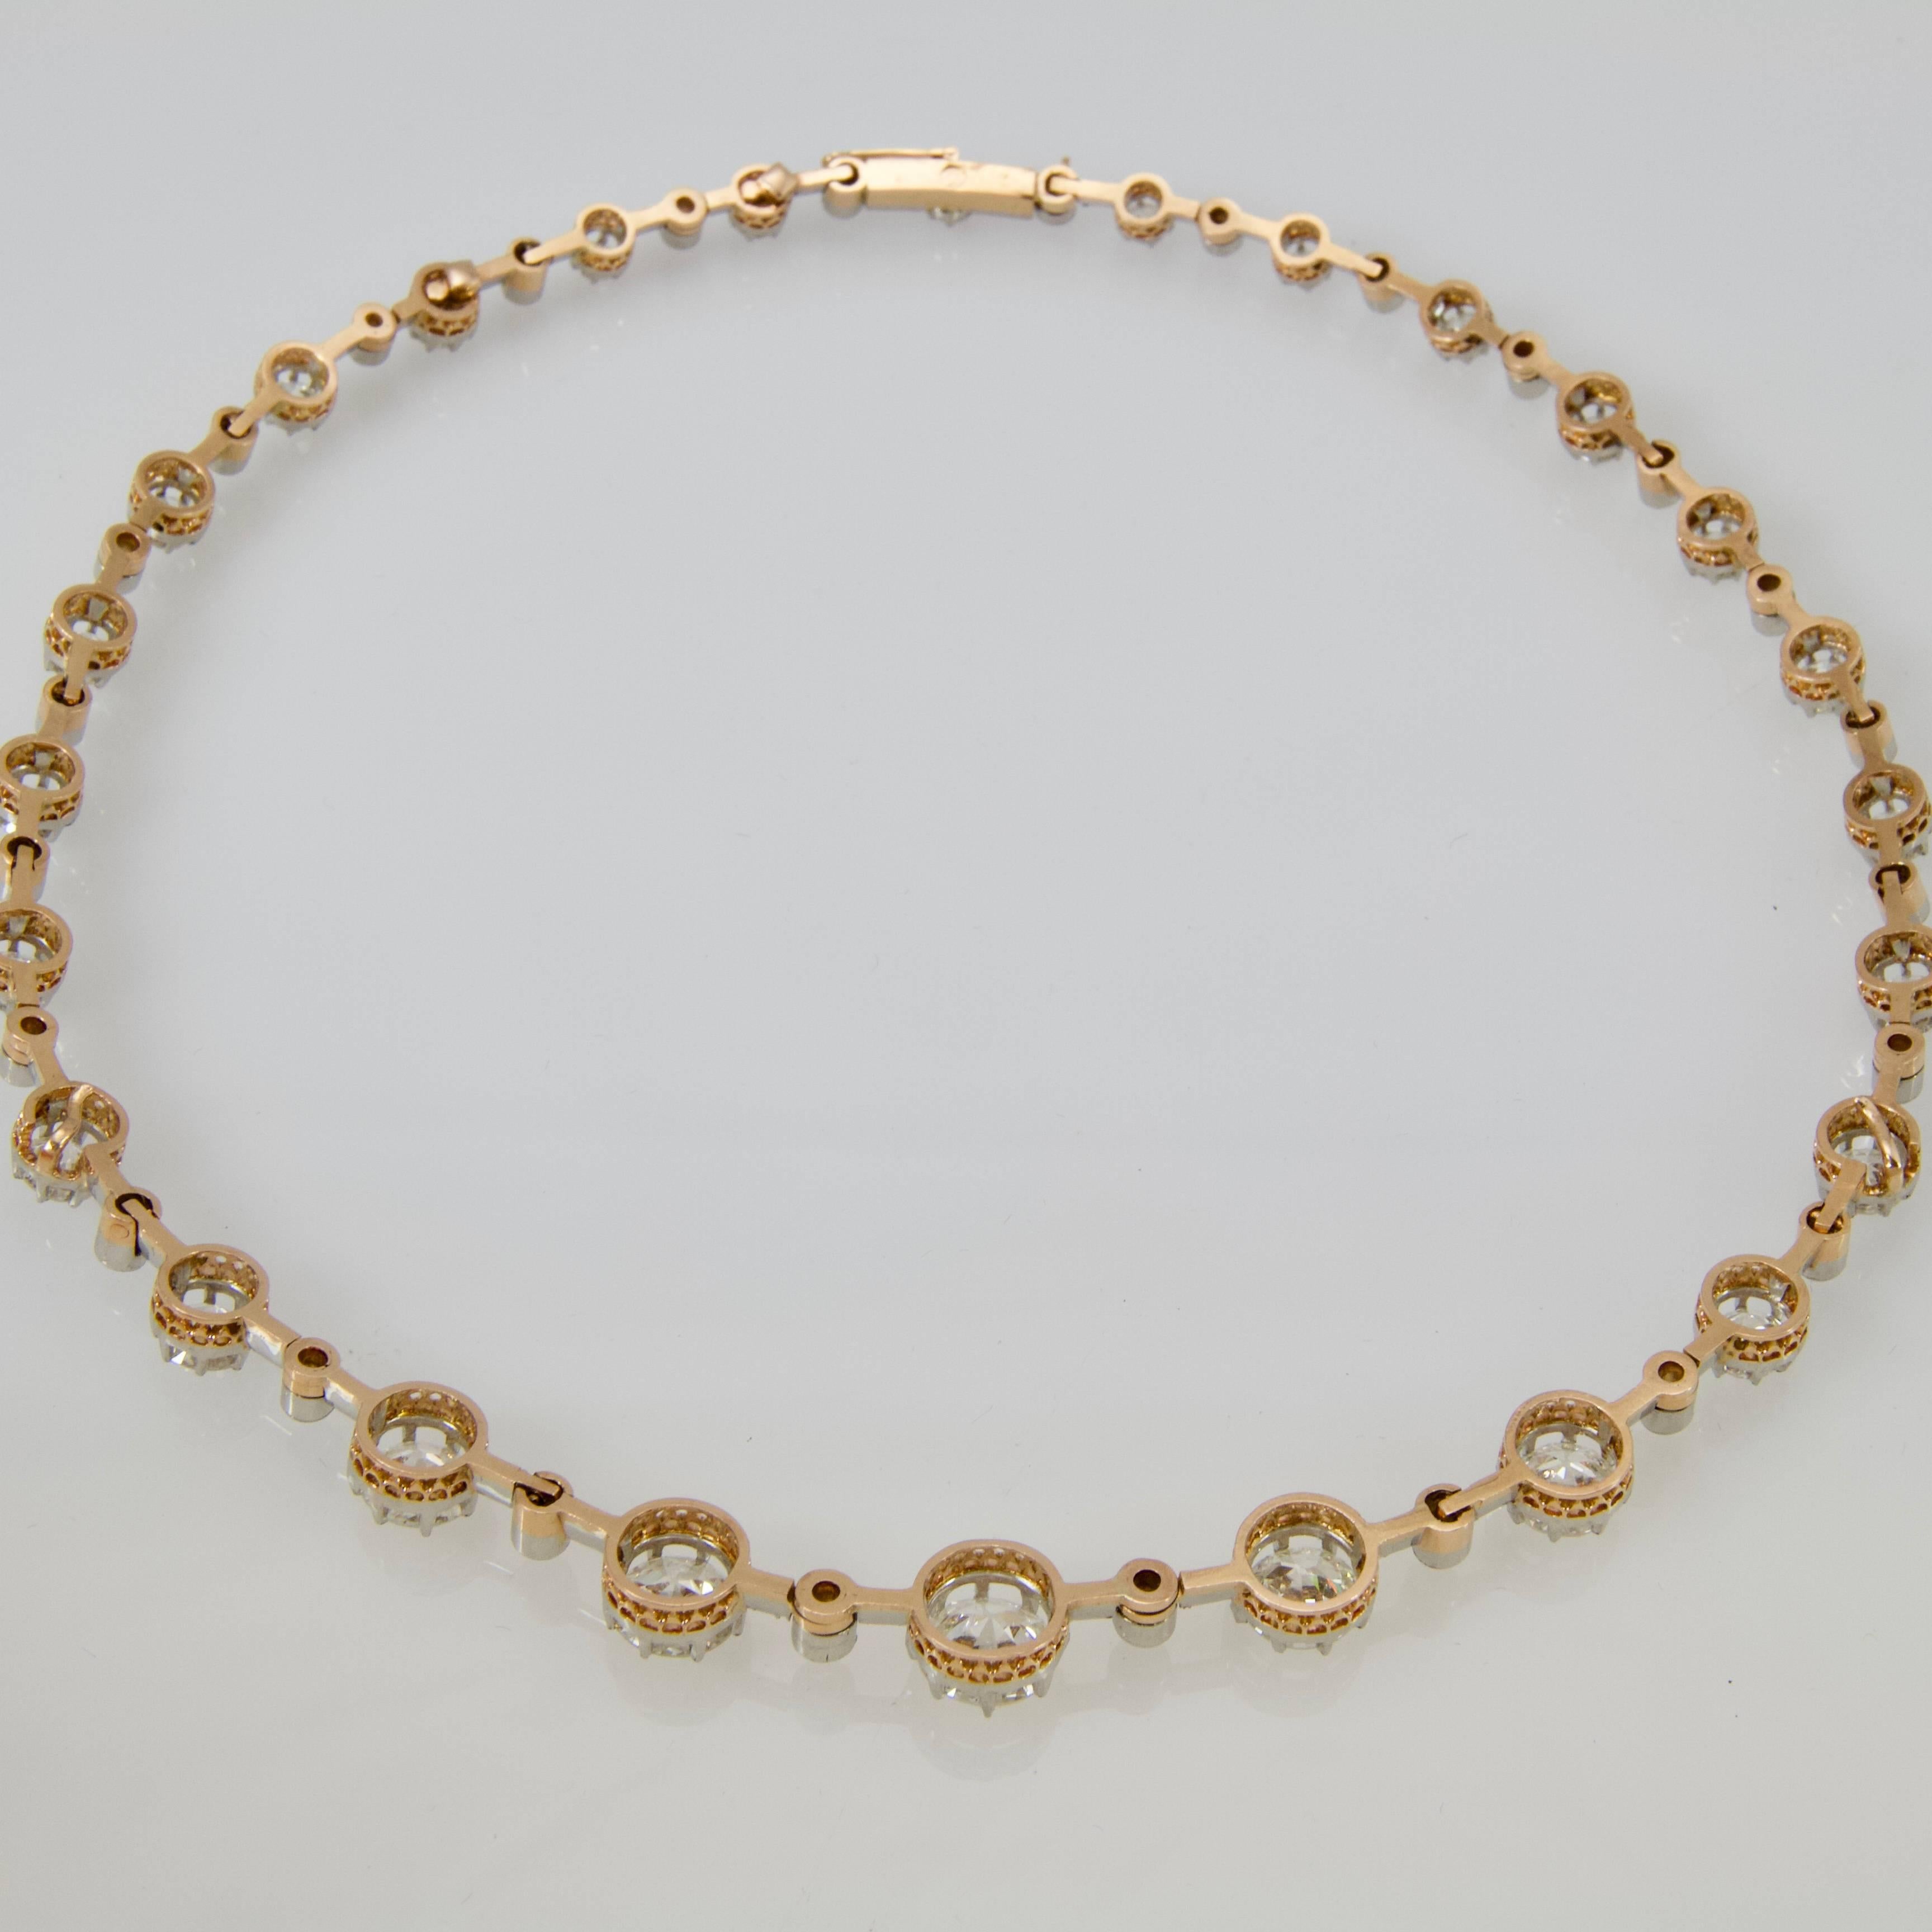 Antique Diamond Necklace by Mellerio Dits Meller In Good Condition For Sale In Paris, FR